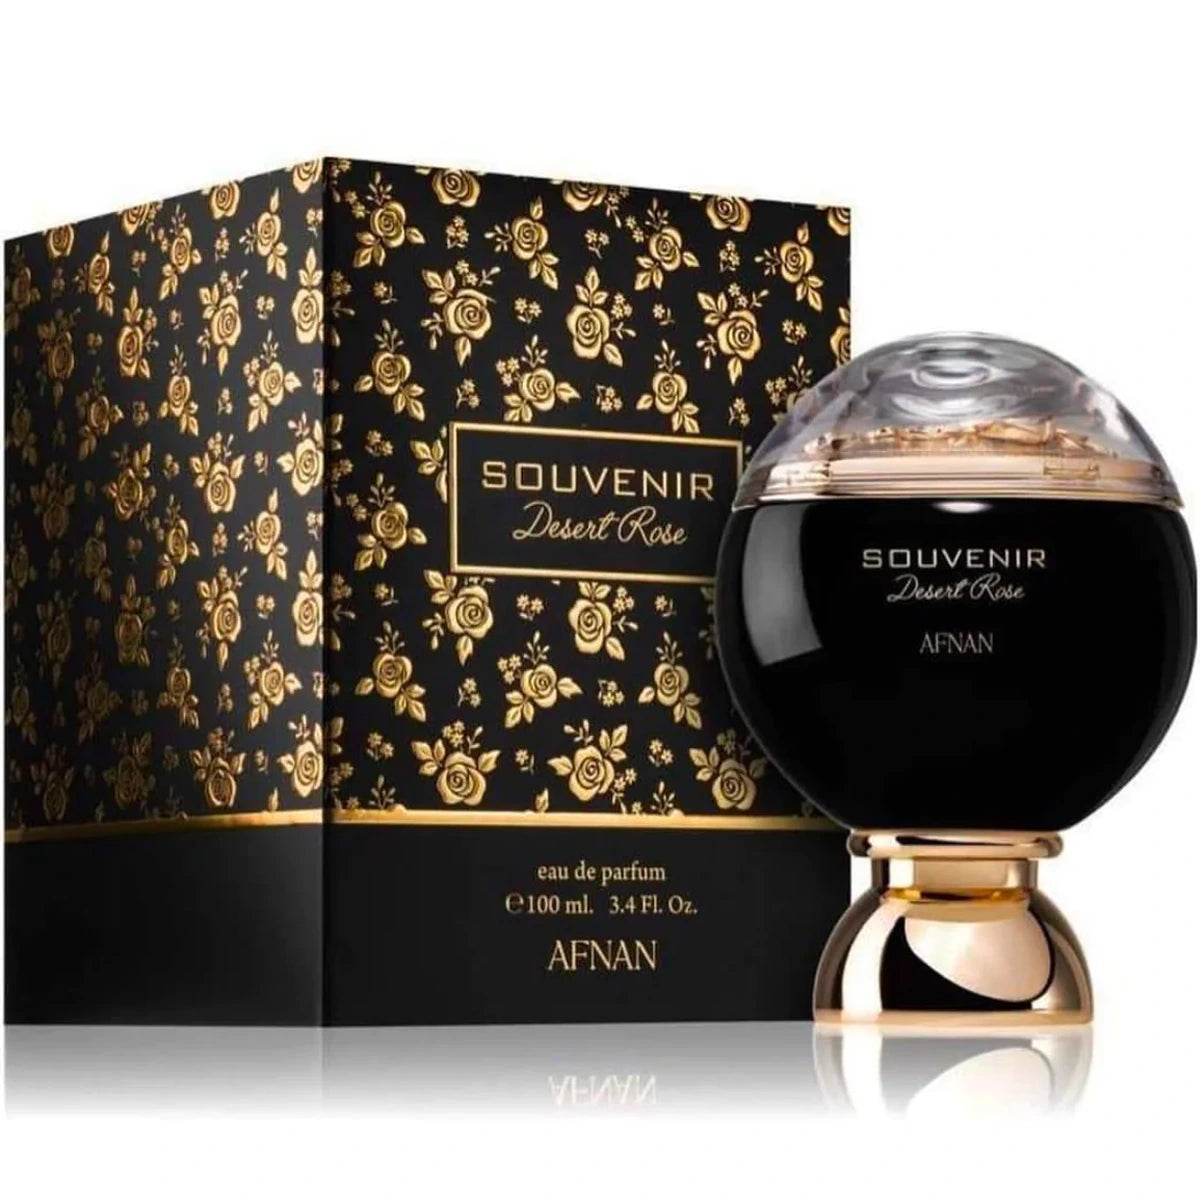 <p data-mce-fragment="1"><em>INSPIRED BY</em> <strong>TIZIANA TERENZI KIRKE</strong></p>
<p data-mce-fragment="1">Introduced in 2020. Souvenir Desert Rose for women is a luxurious blend of amber, floral, and musky scents. This exquisite fragrance is the perfect combination of fruity notes, tropical fruits, powdery notes, citruses, sandalwood, and amber. Souvenir Desert Rose will make an alluring and memorable impression.</p>